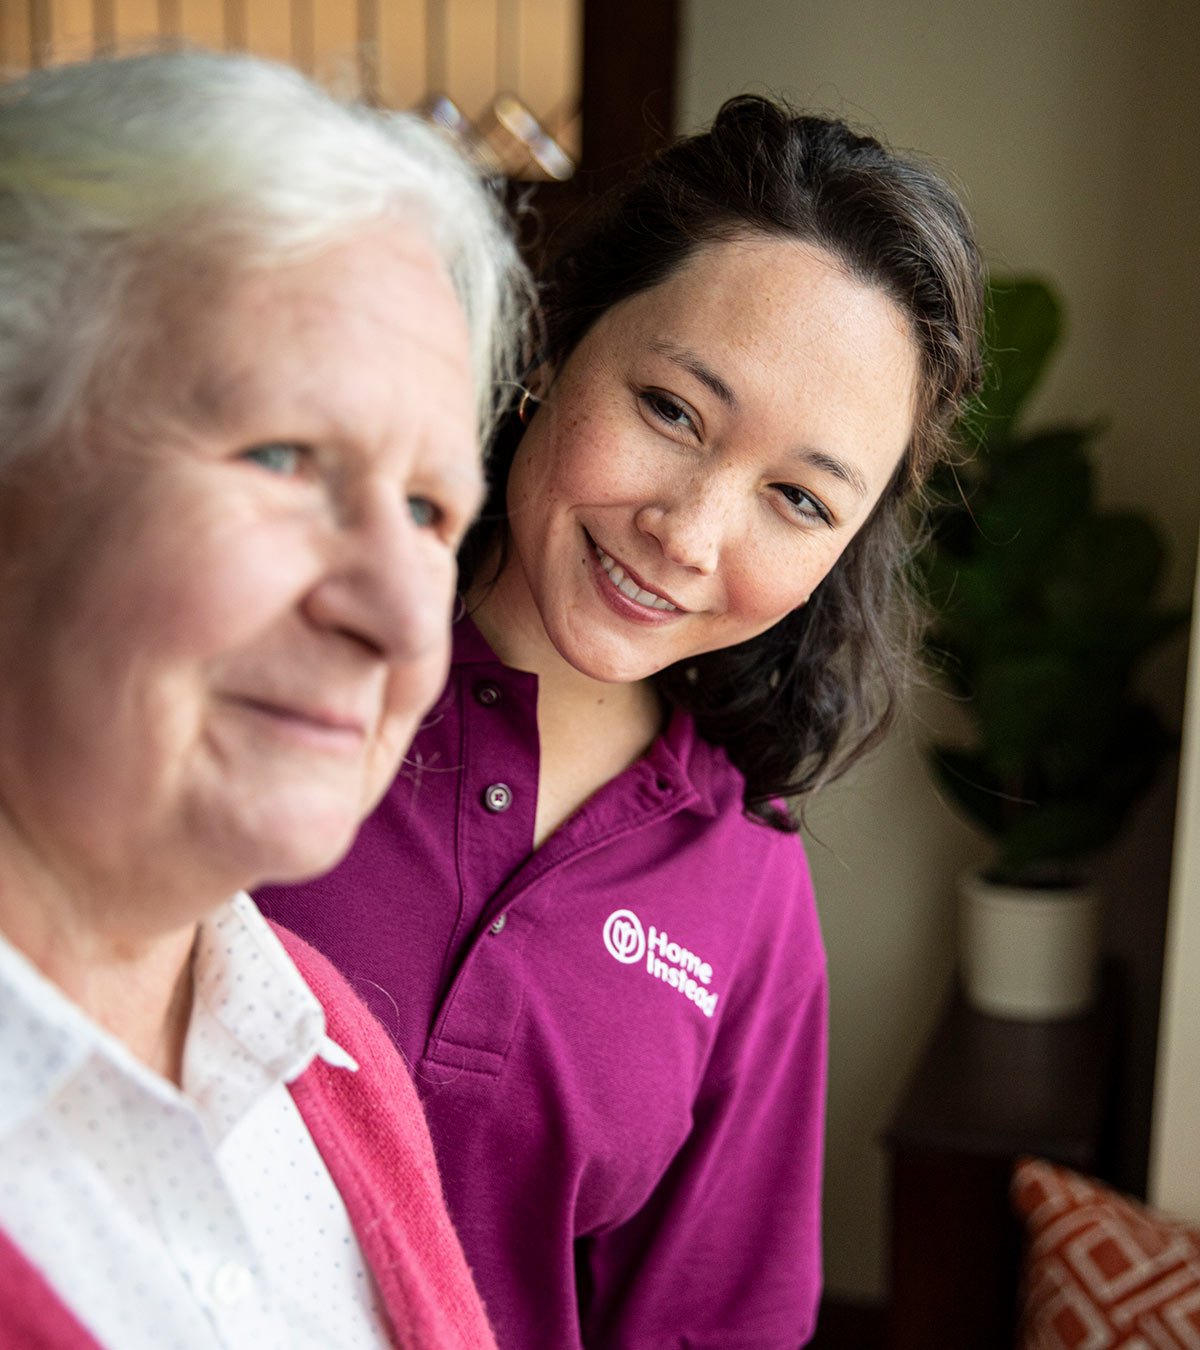 In Home Senior Care Services Vancouver, Home Health Care Assistance